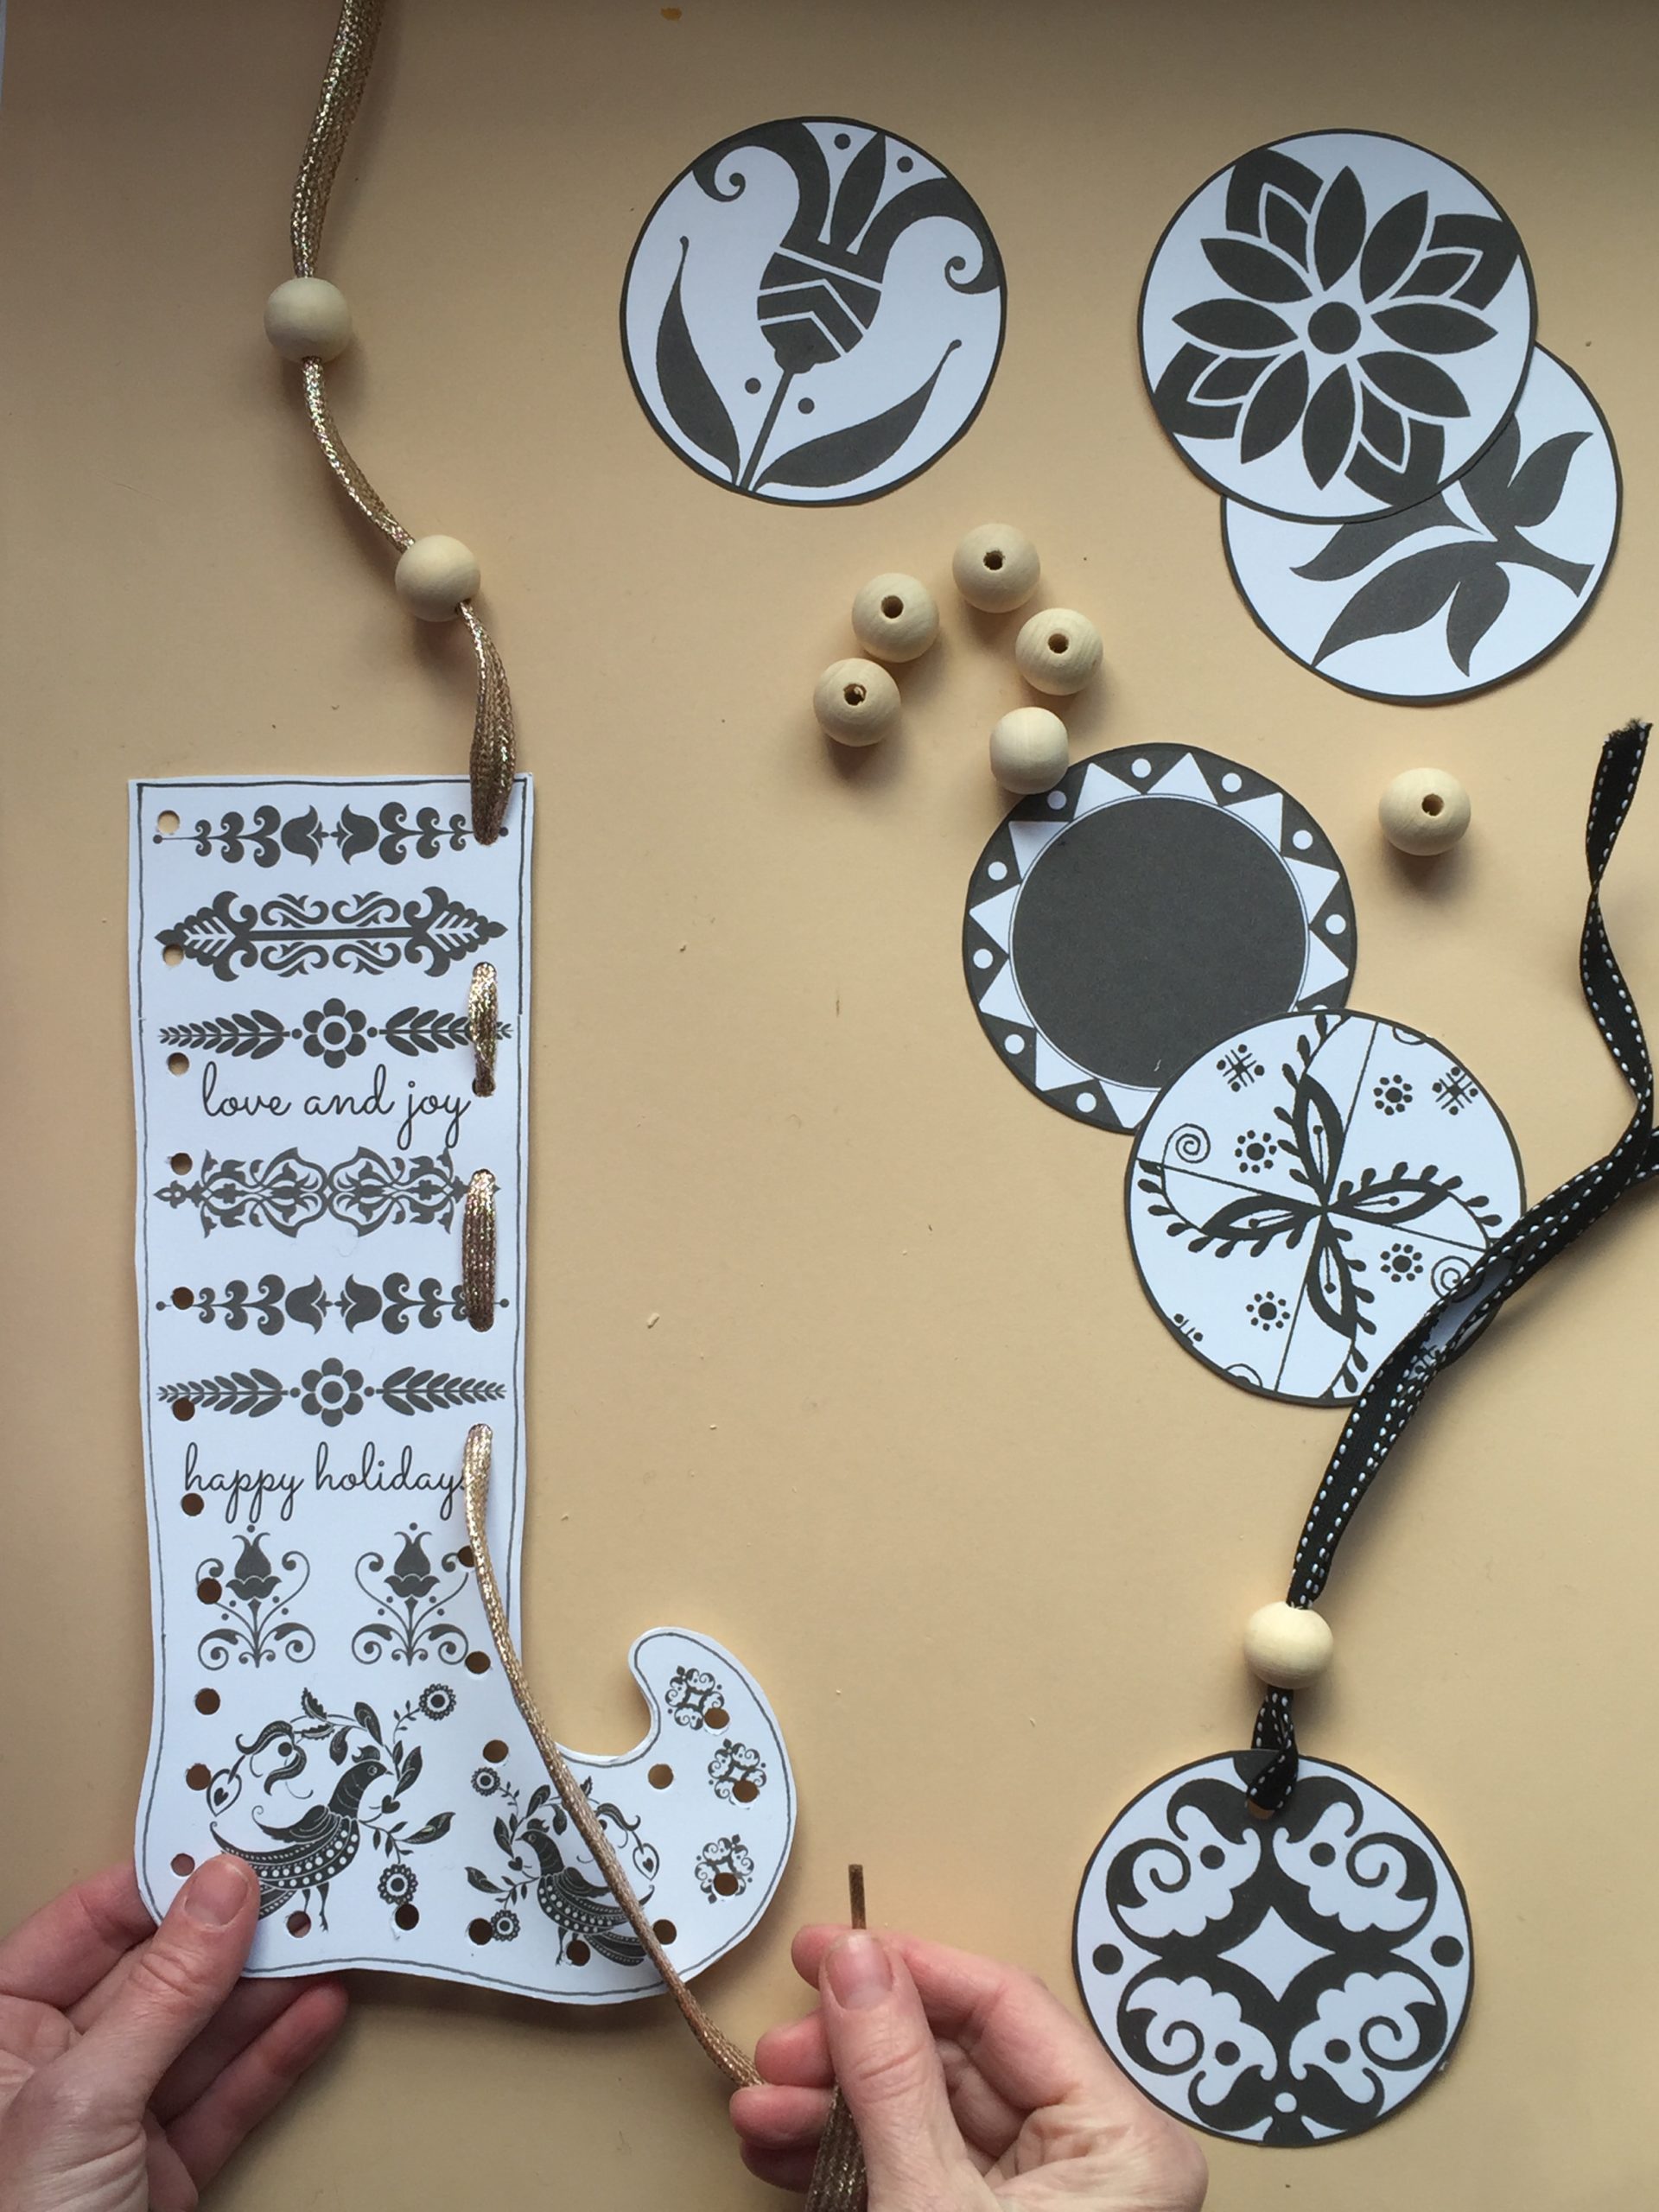 Monochrome Christmas Baubles and Stockings – DIY ornaments kit